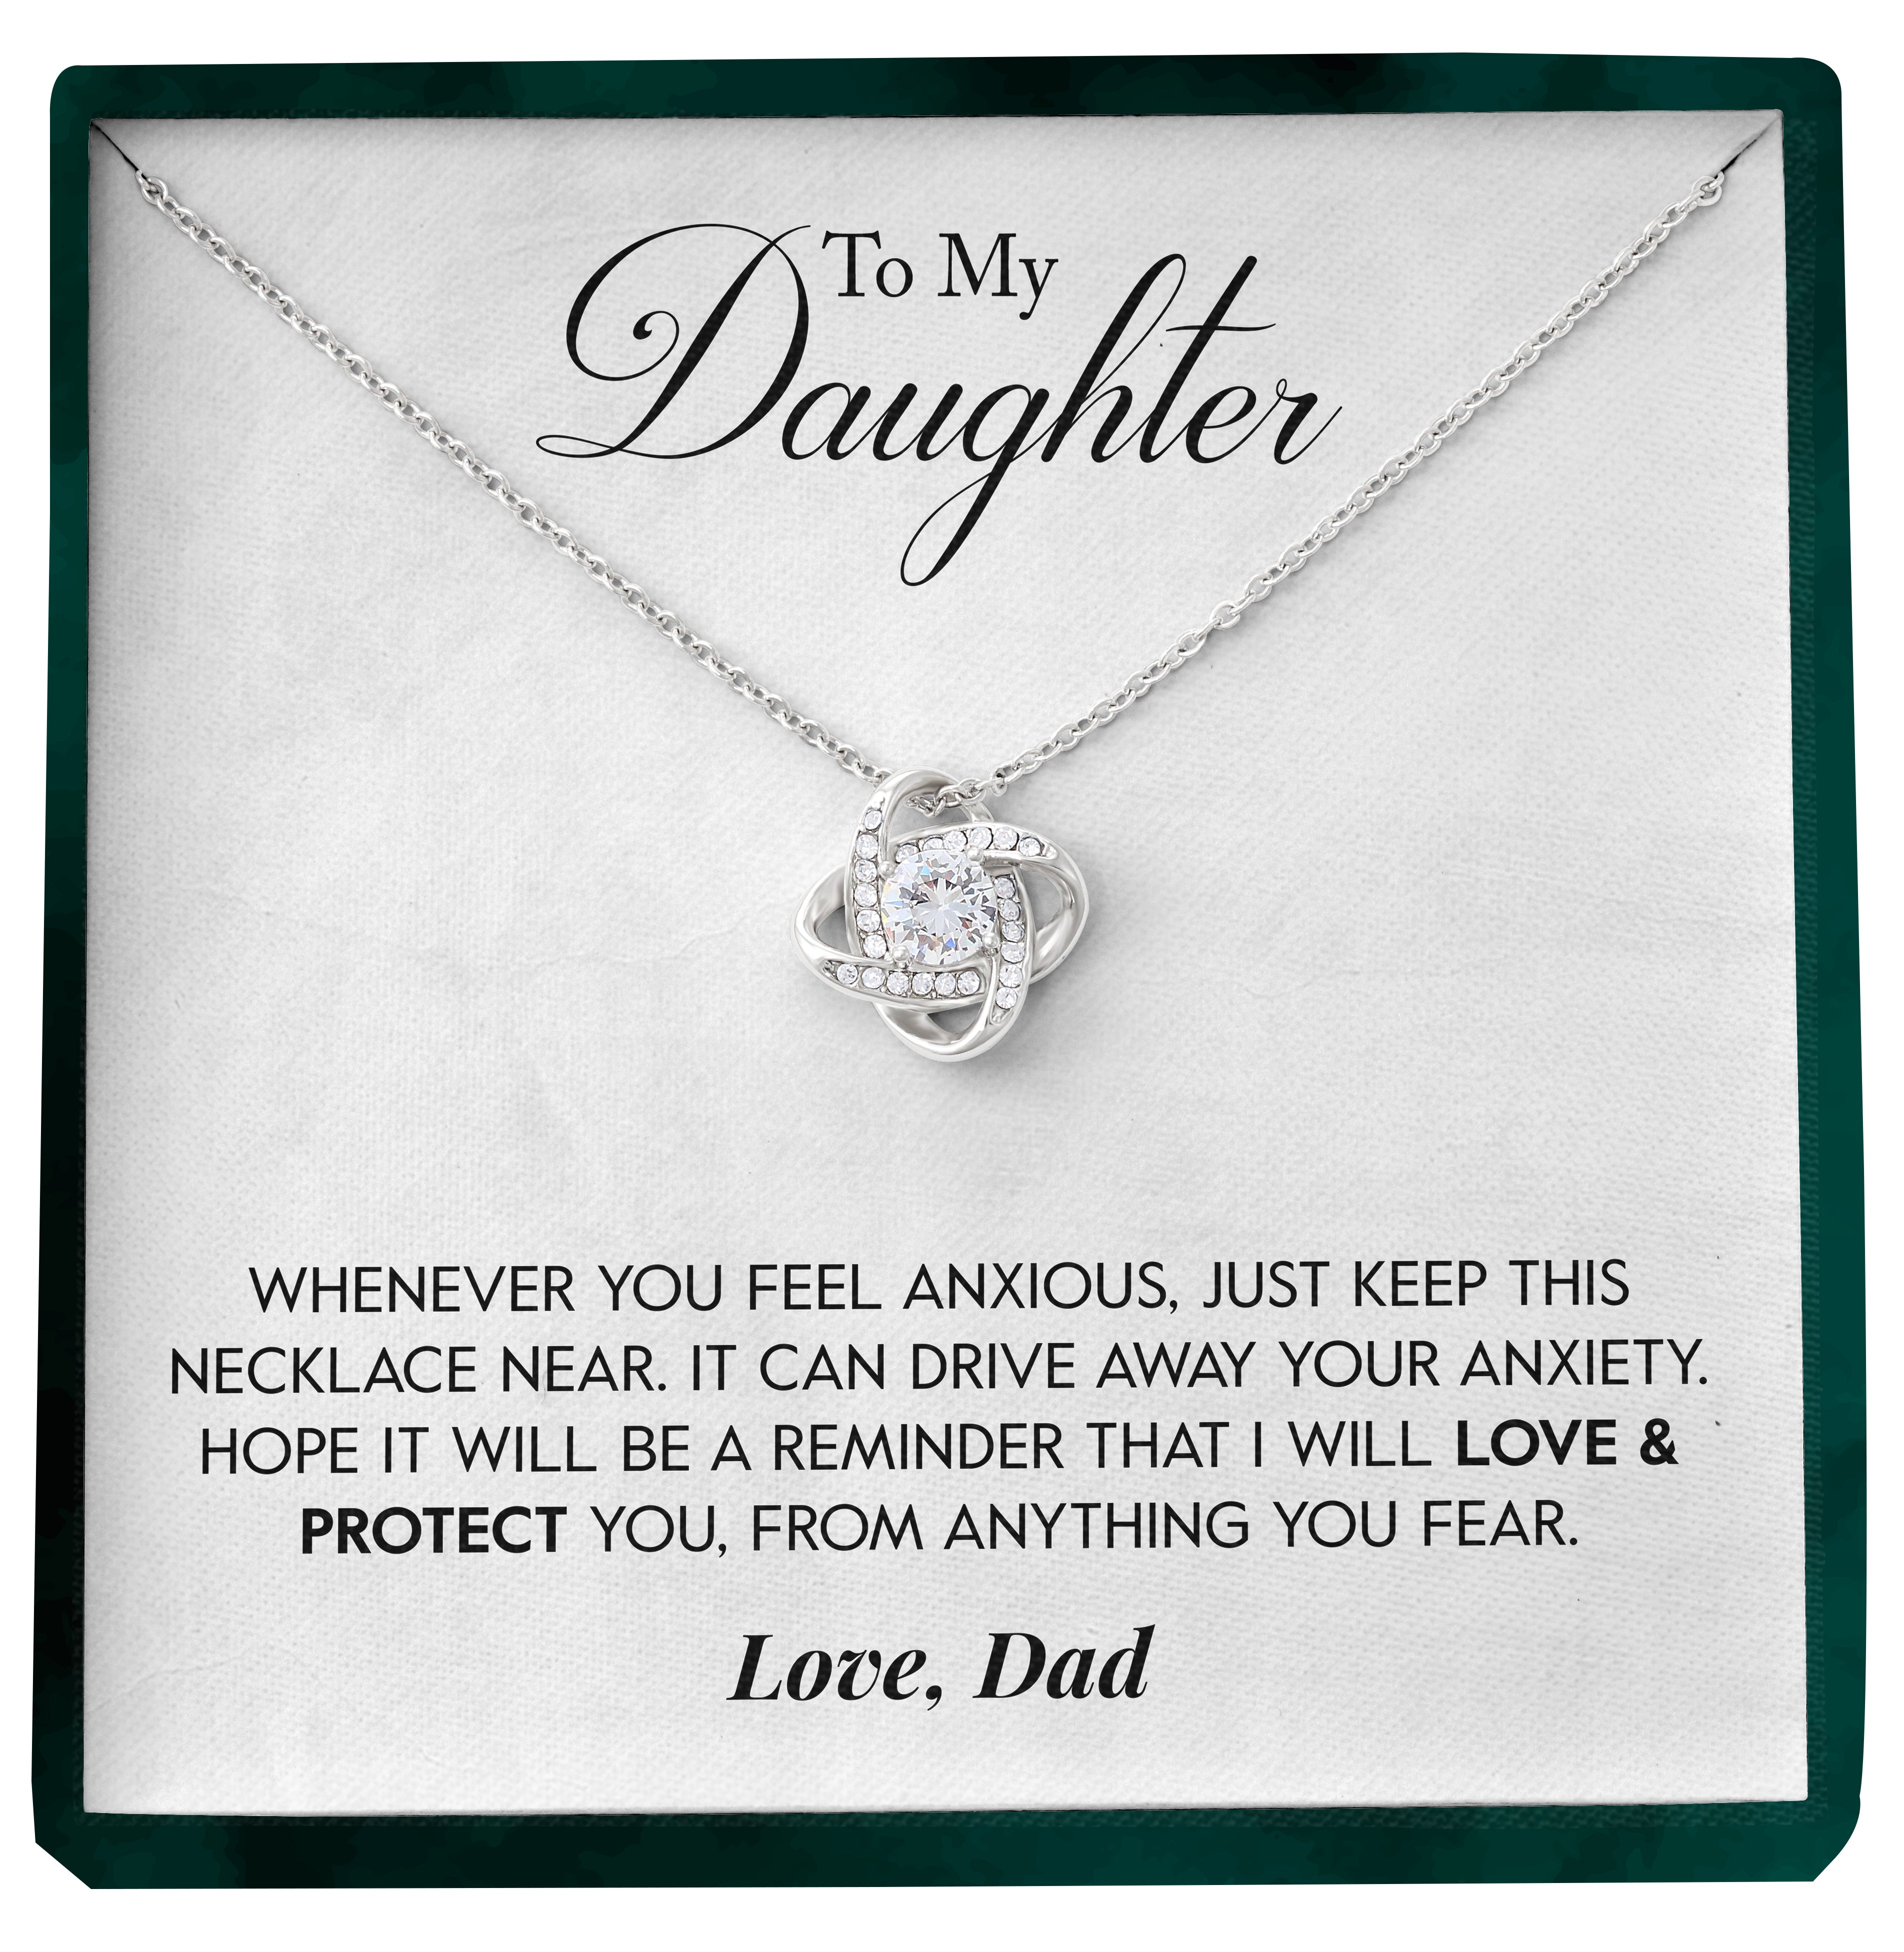 To My Daughter | "Protect and Love" | Love Knot Necklace